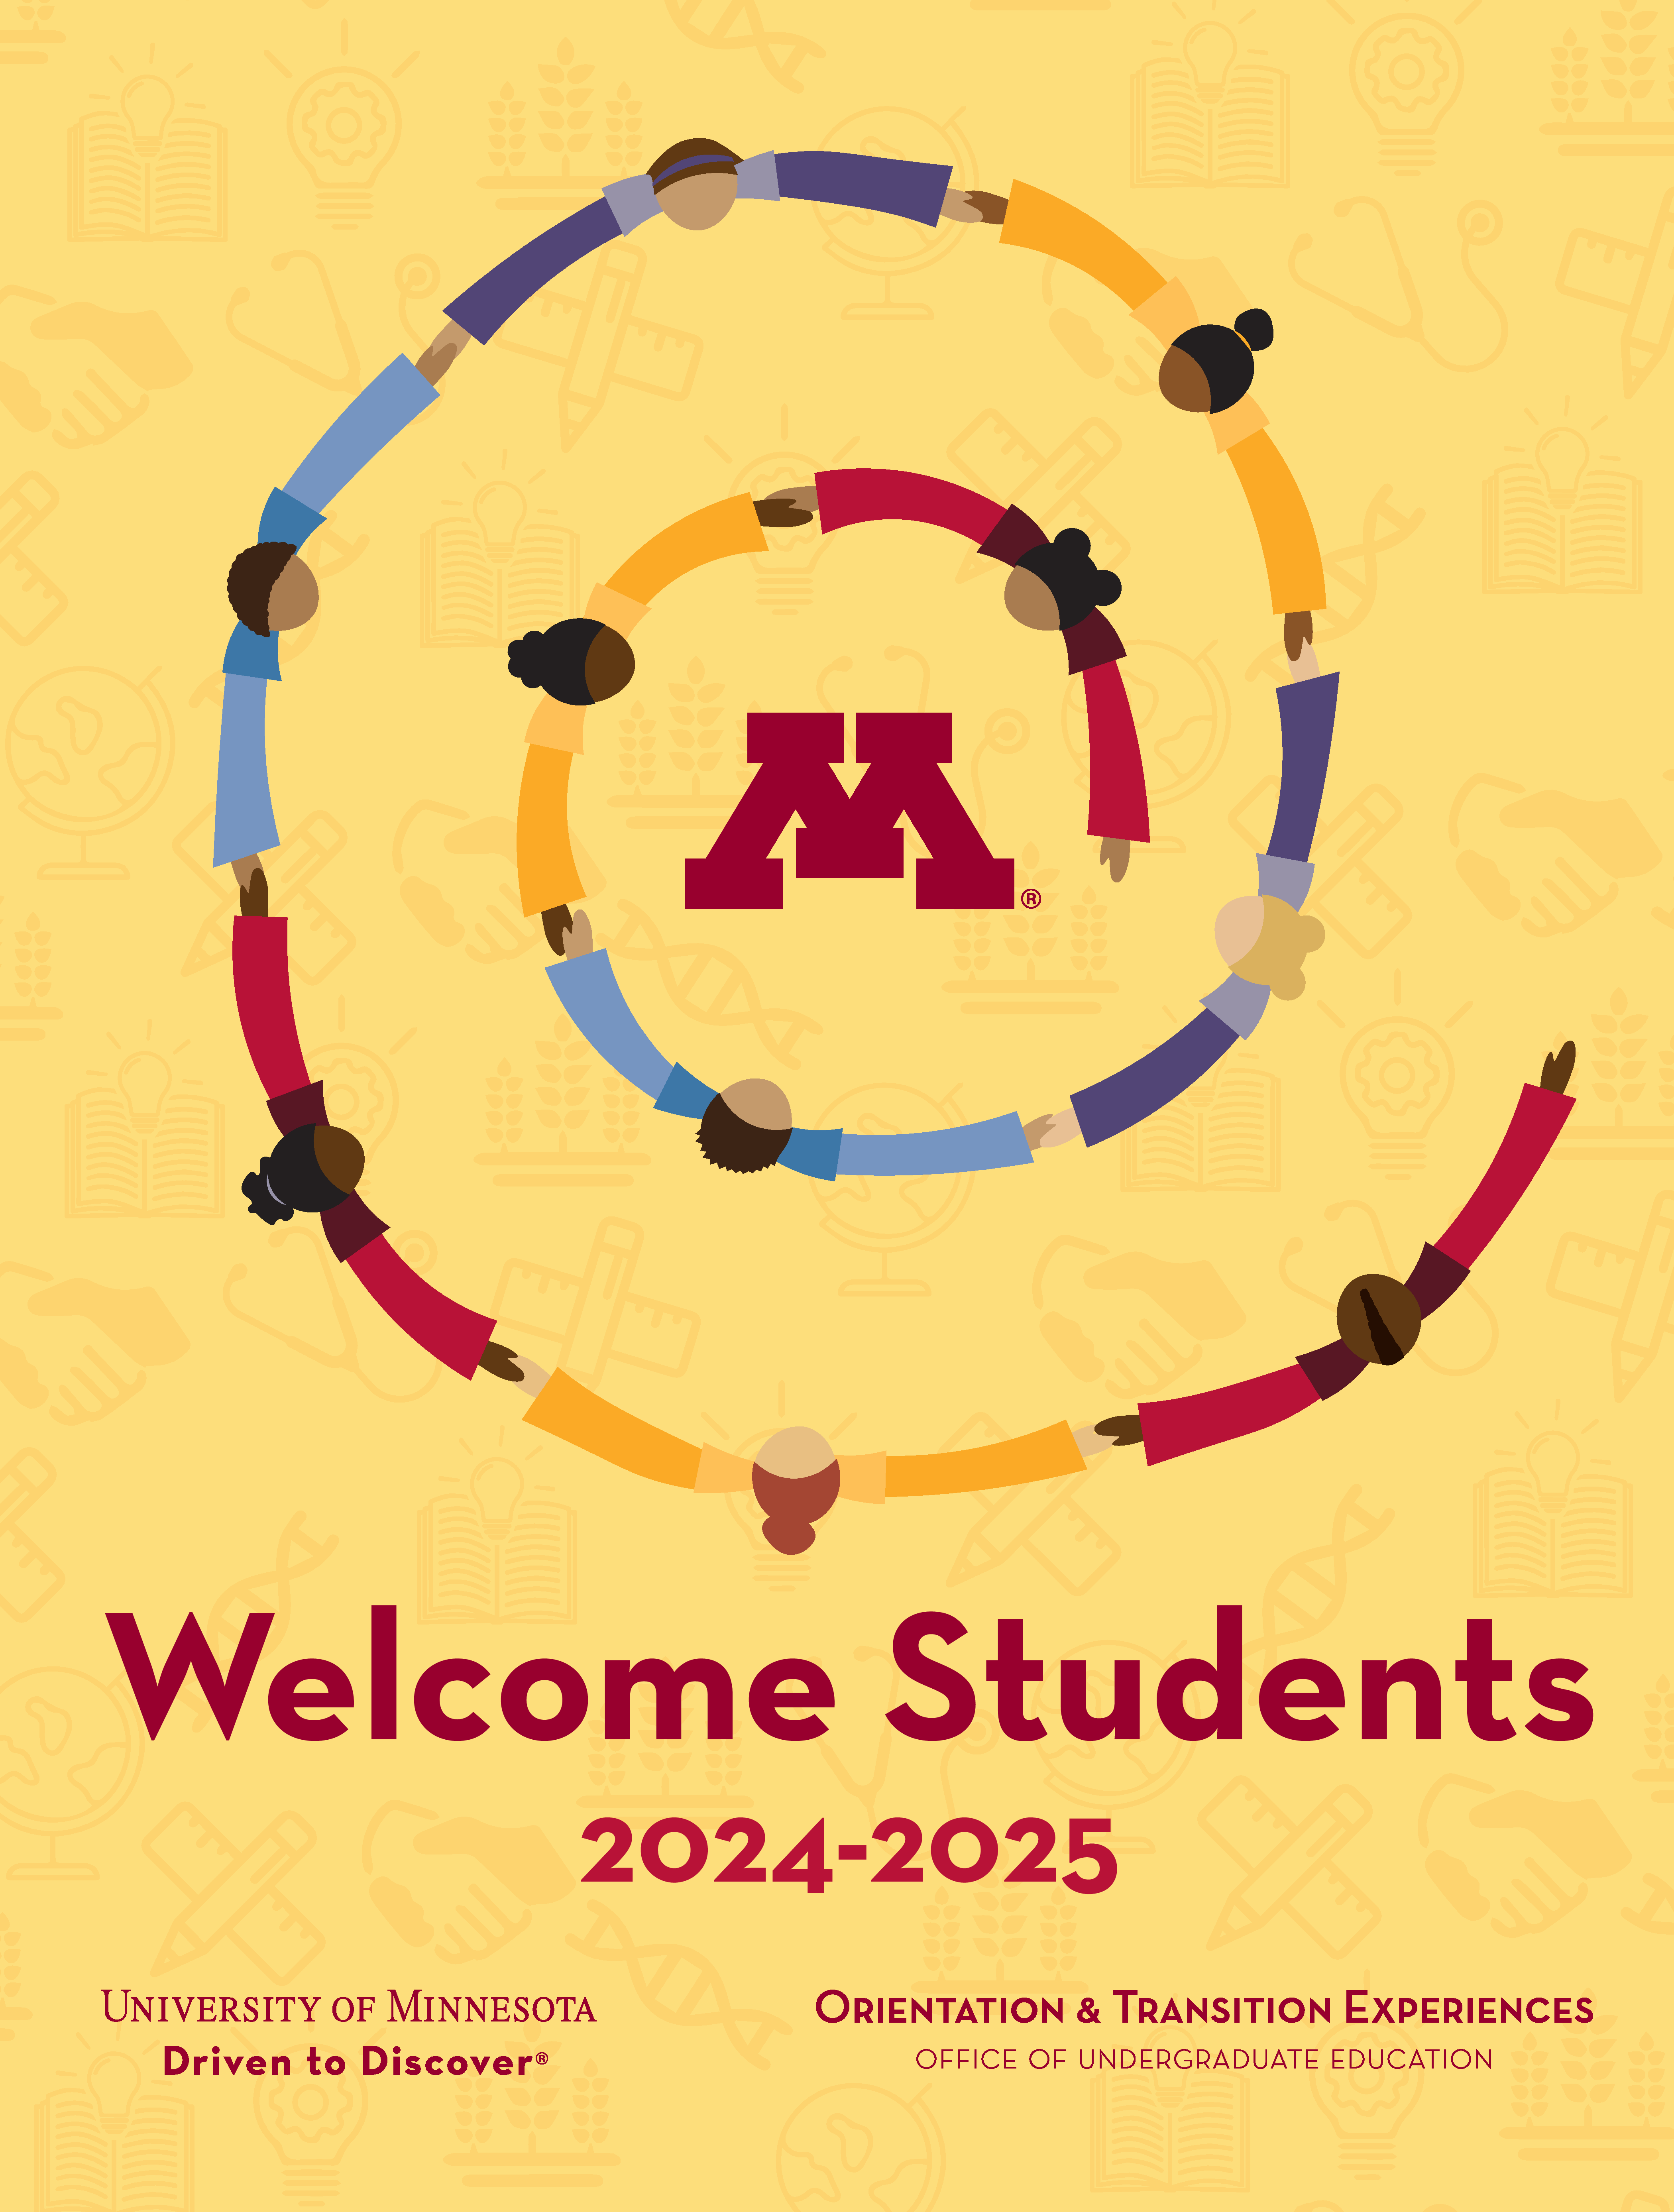 Welcome Students poster with an artistic design or students holding hands and each college represented in the background